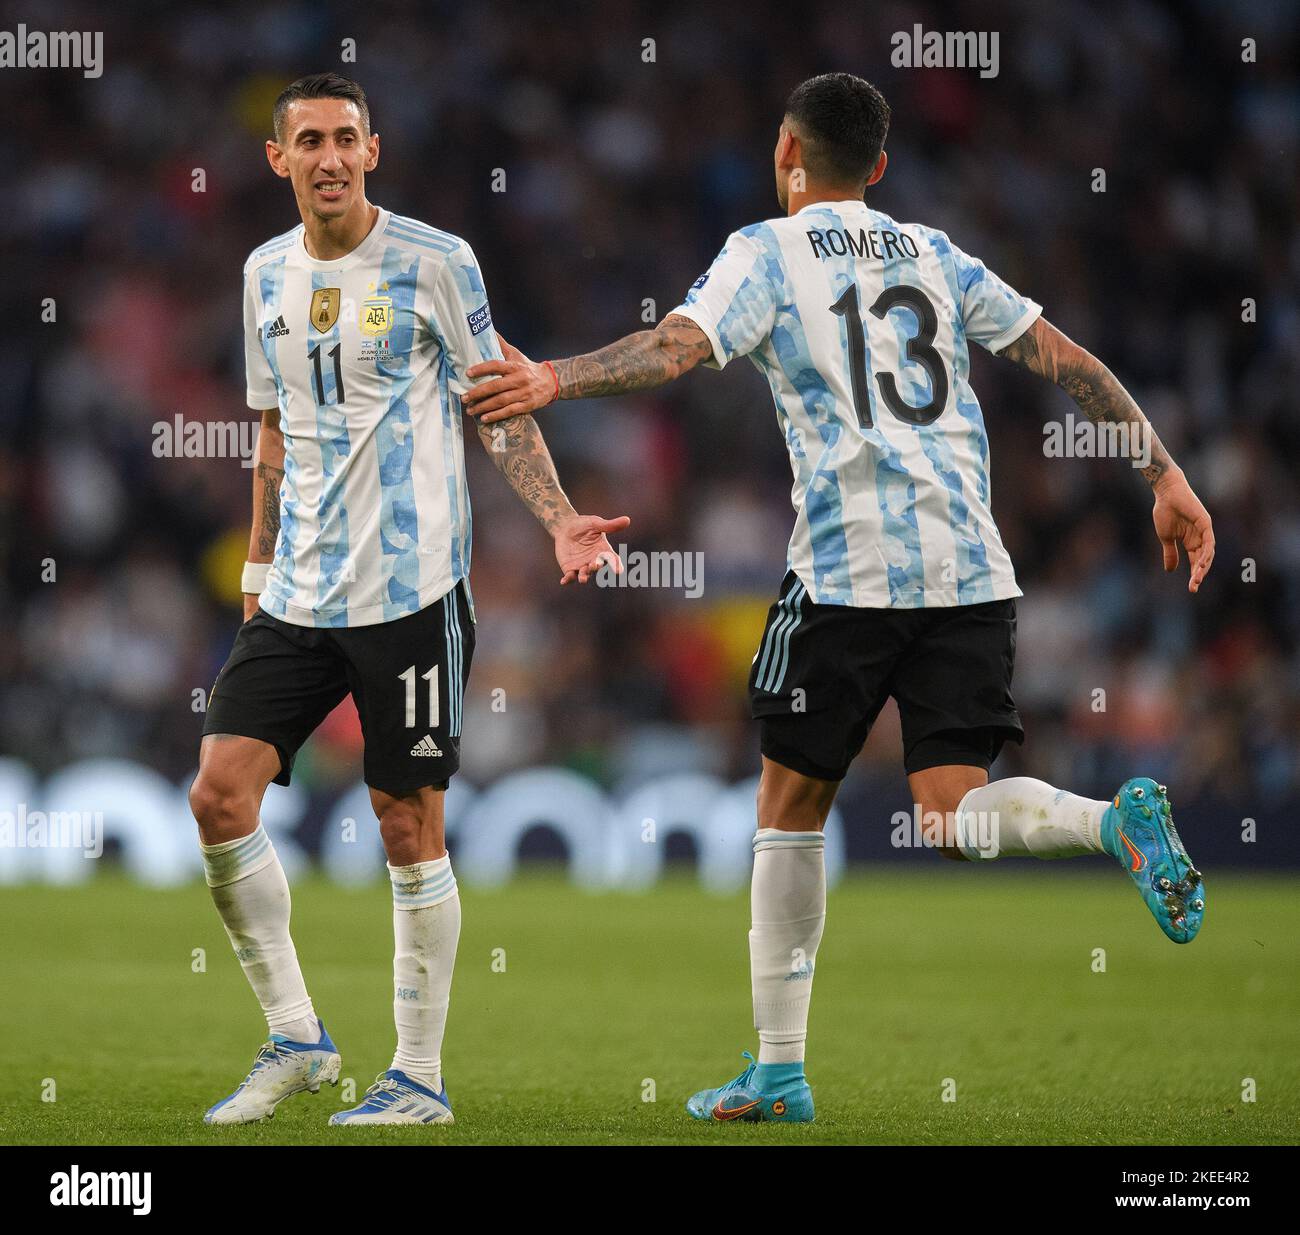 01 Jun 2022 - Italy v Argentina - Finalissima 2022 - Wembley Stadium  Argentina's Angel Di Maria and Cristian Romero during the match against Italy at Wembley Stadium. Picture Credit : © Mark Pain / Alamy Stock Photo